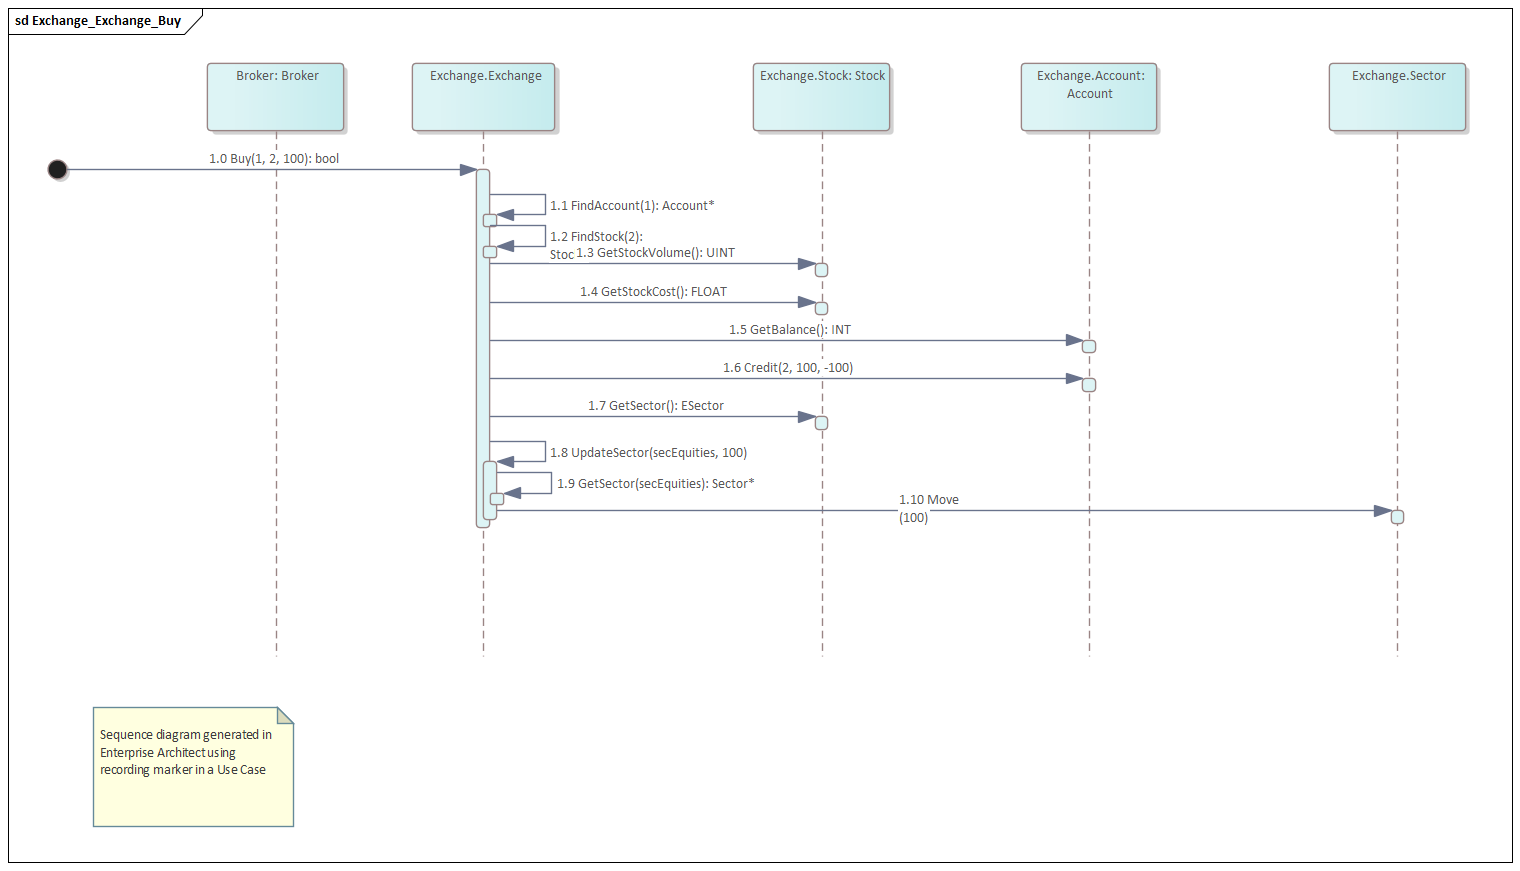 Sequence diagram created in Visual Execution Analysis, Sparx Systems Enterprise Architect.